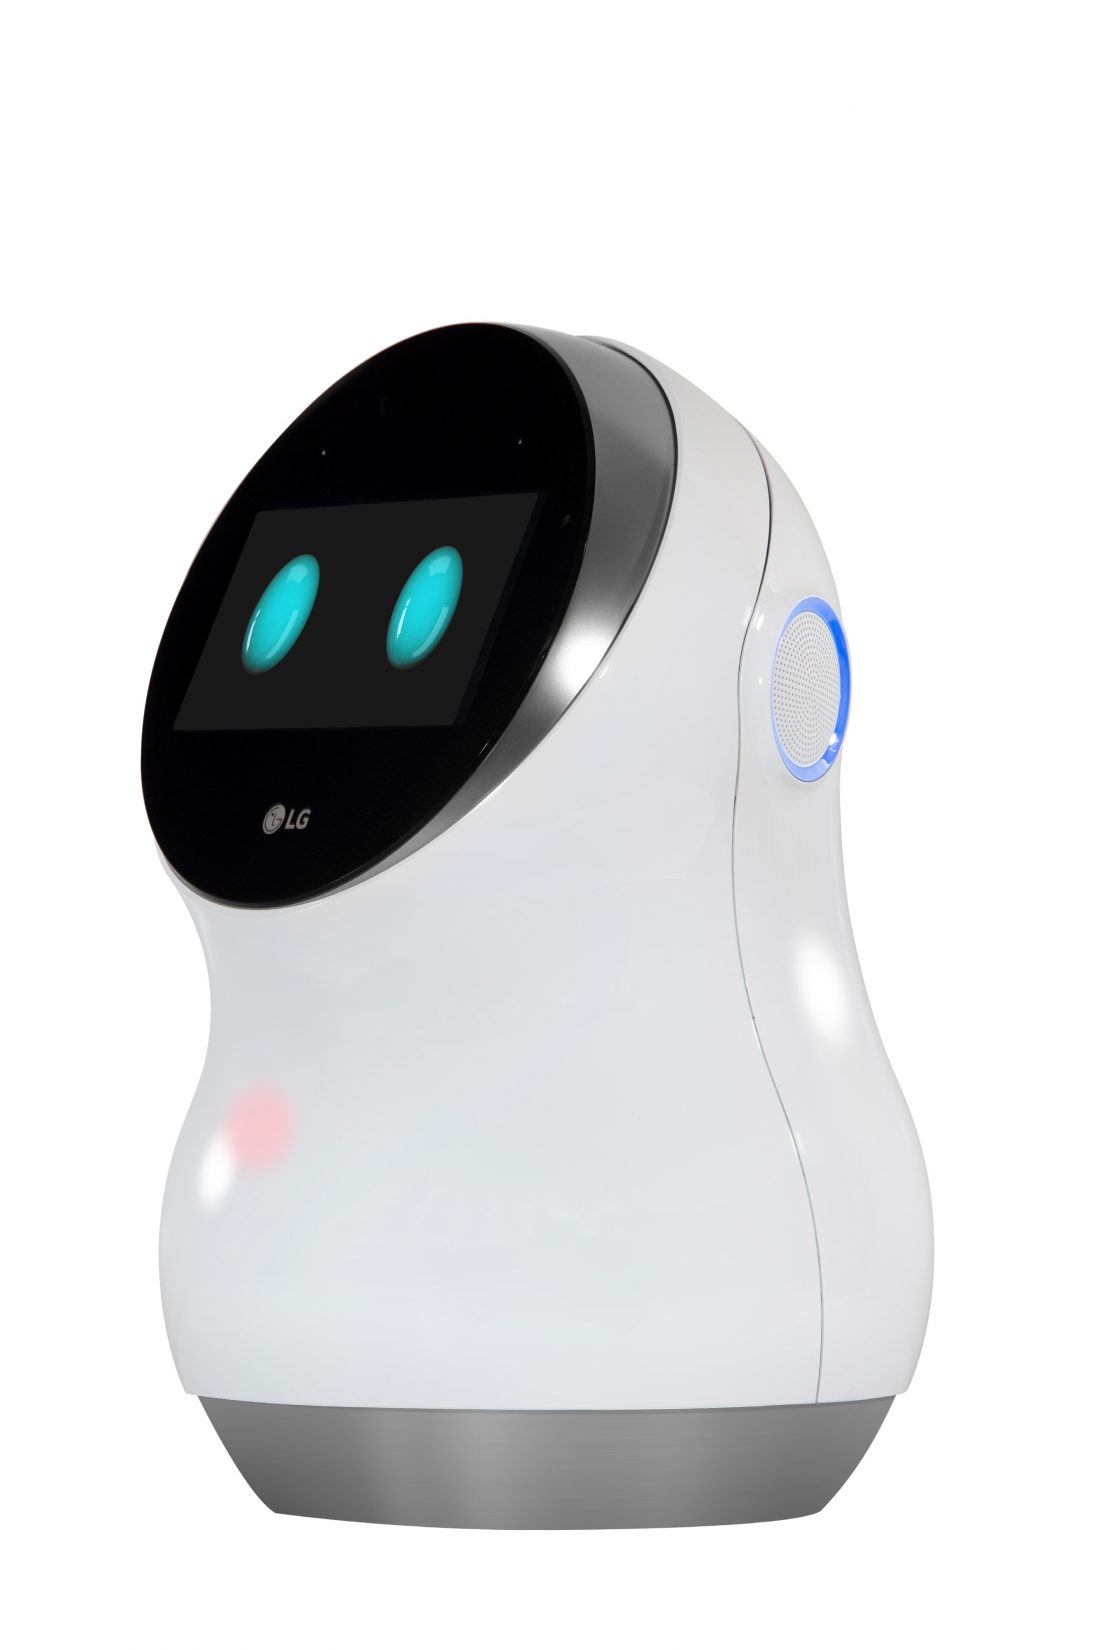 Front view of LG's CLOi hub robot facing 45 degrees to the left